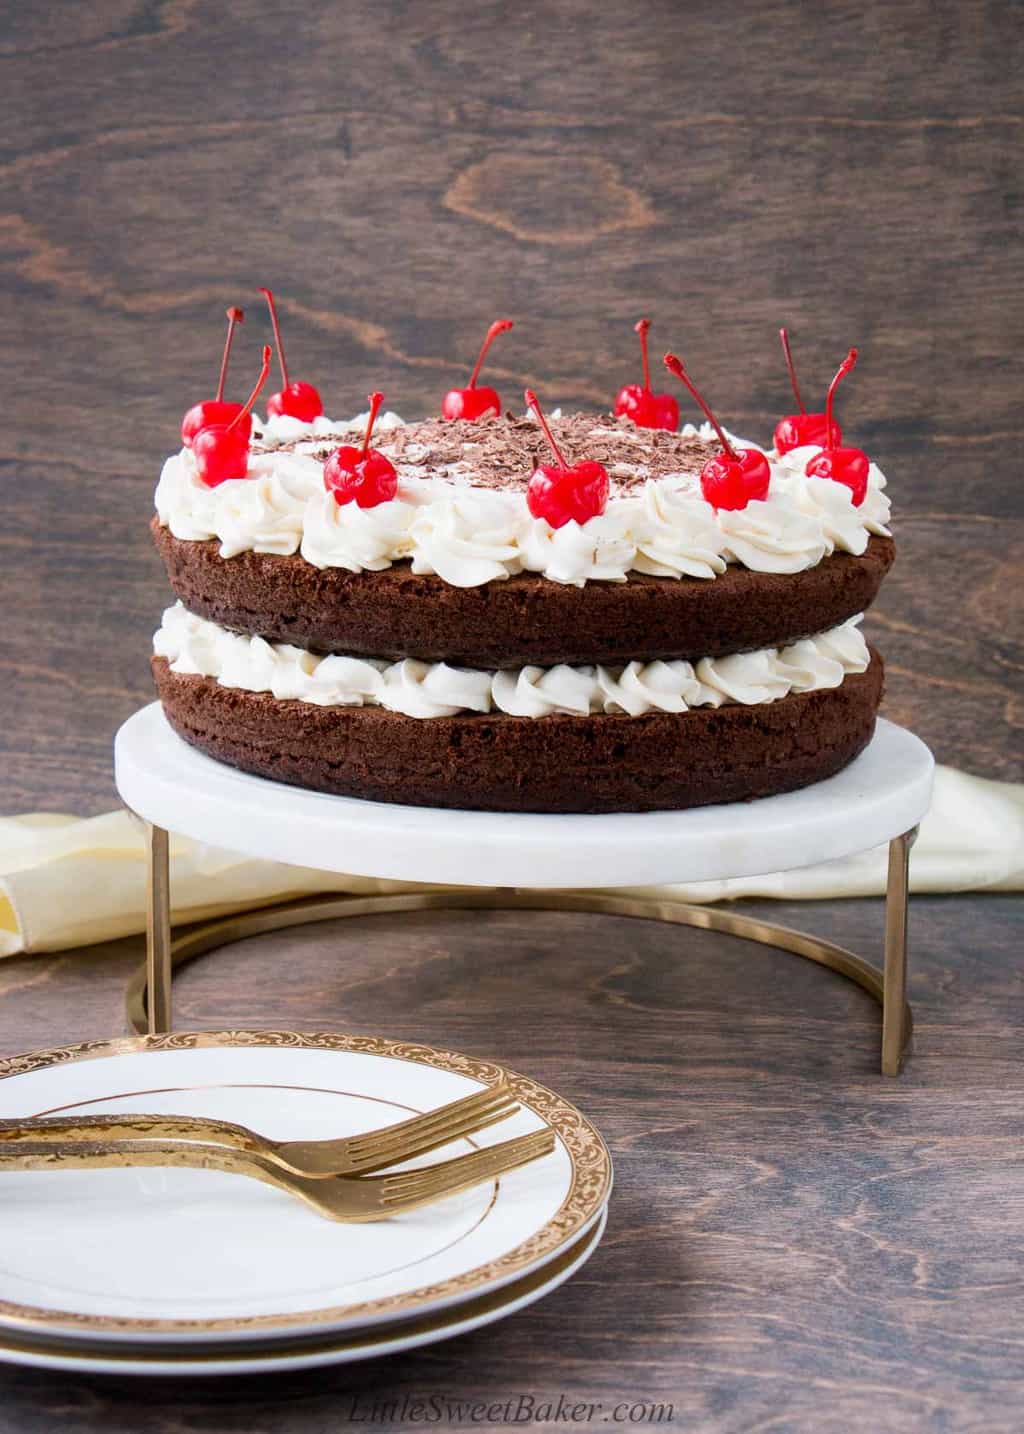 How Black Forest Cake May Have Gotten Its Name